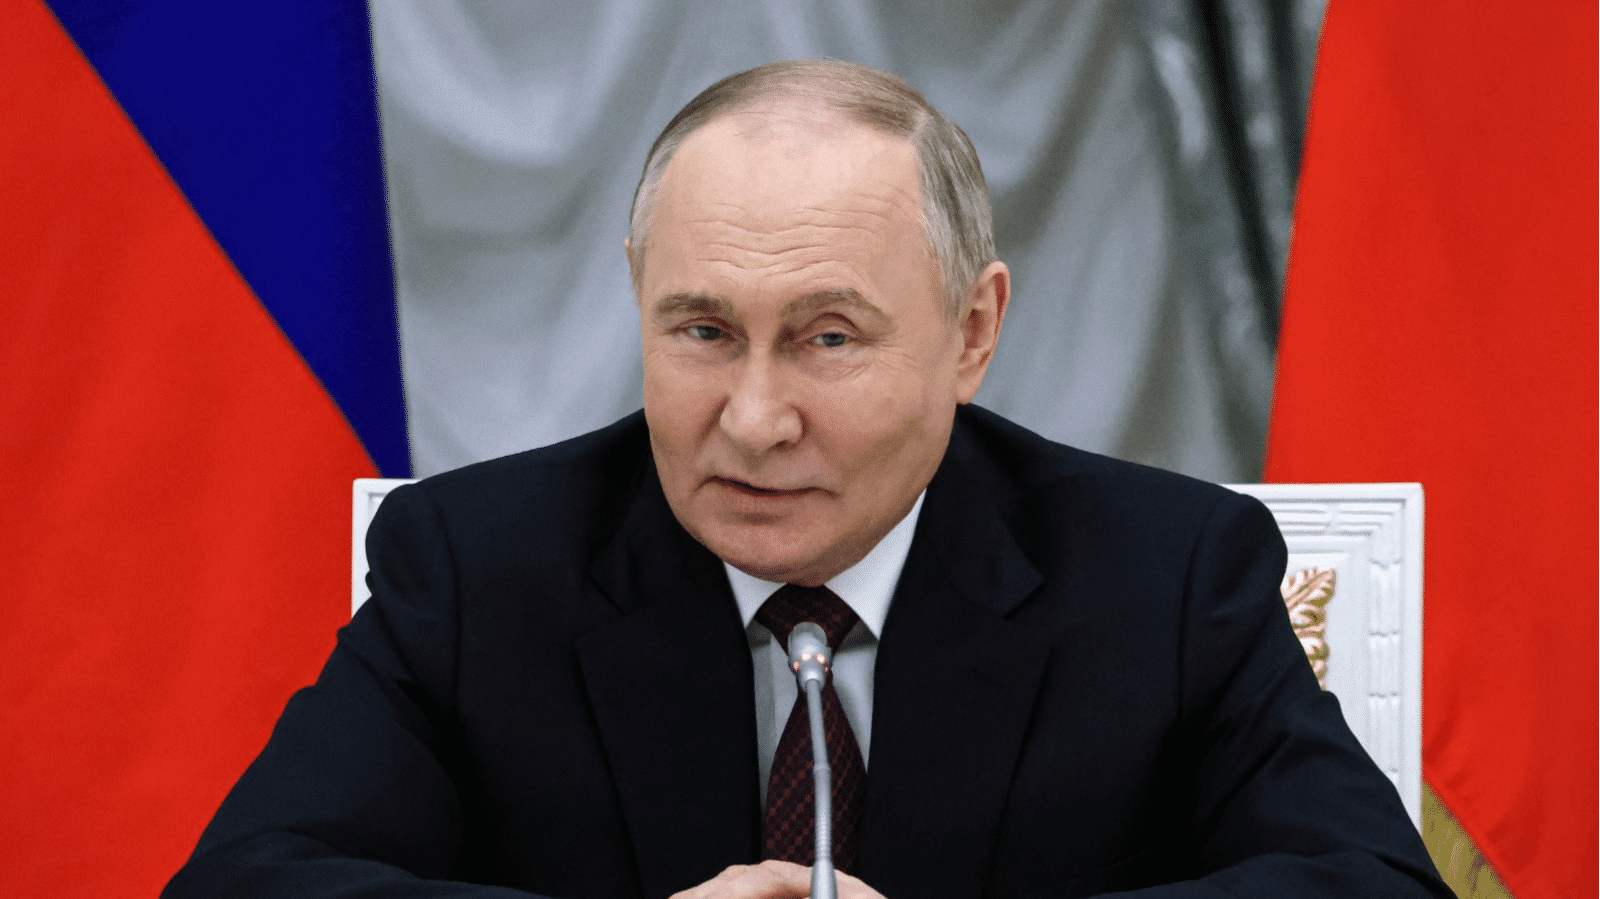 On the Eve of His Visit to China, Putin Says Russia Is Prepared to Negotiate Over Ukraine- Republic World